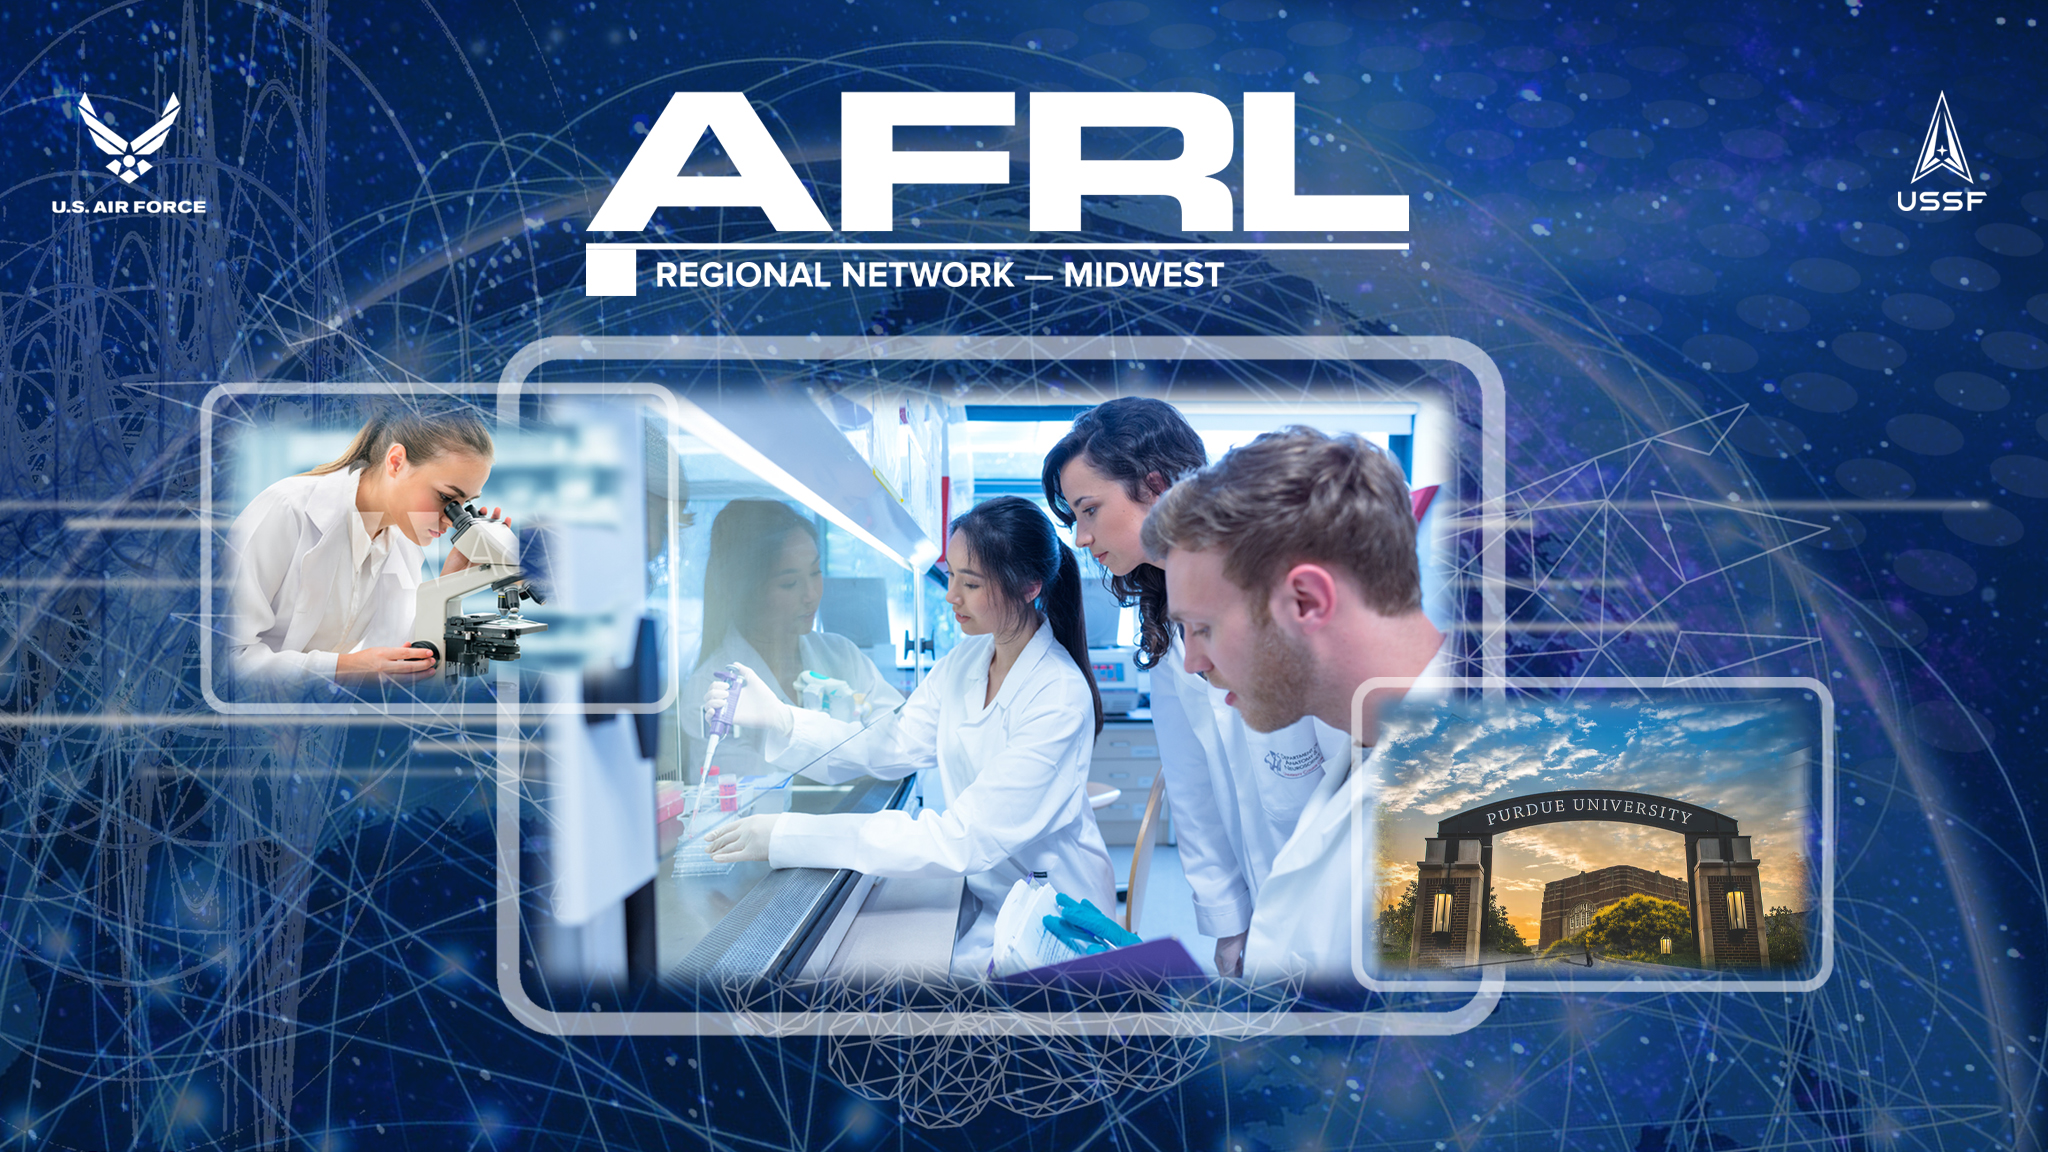 AFRL Regional Network Midwest feature image